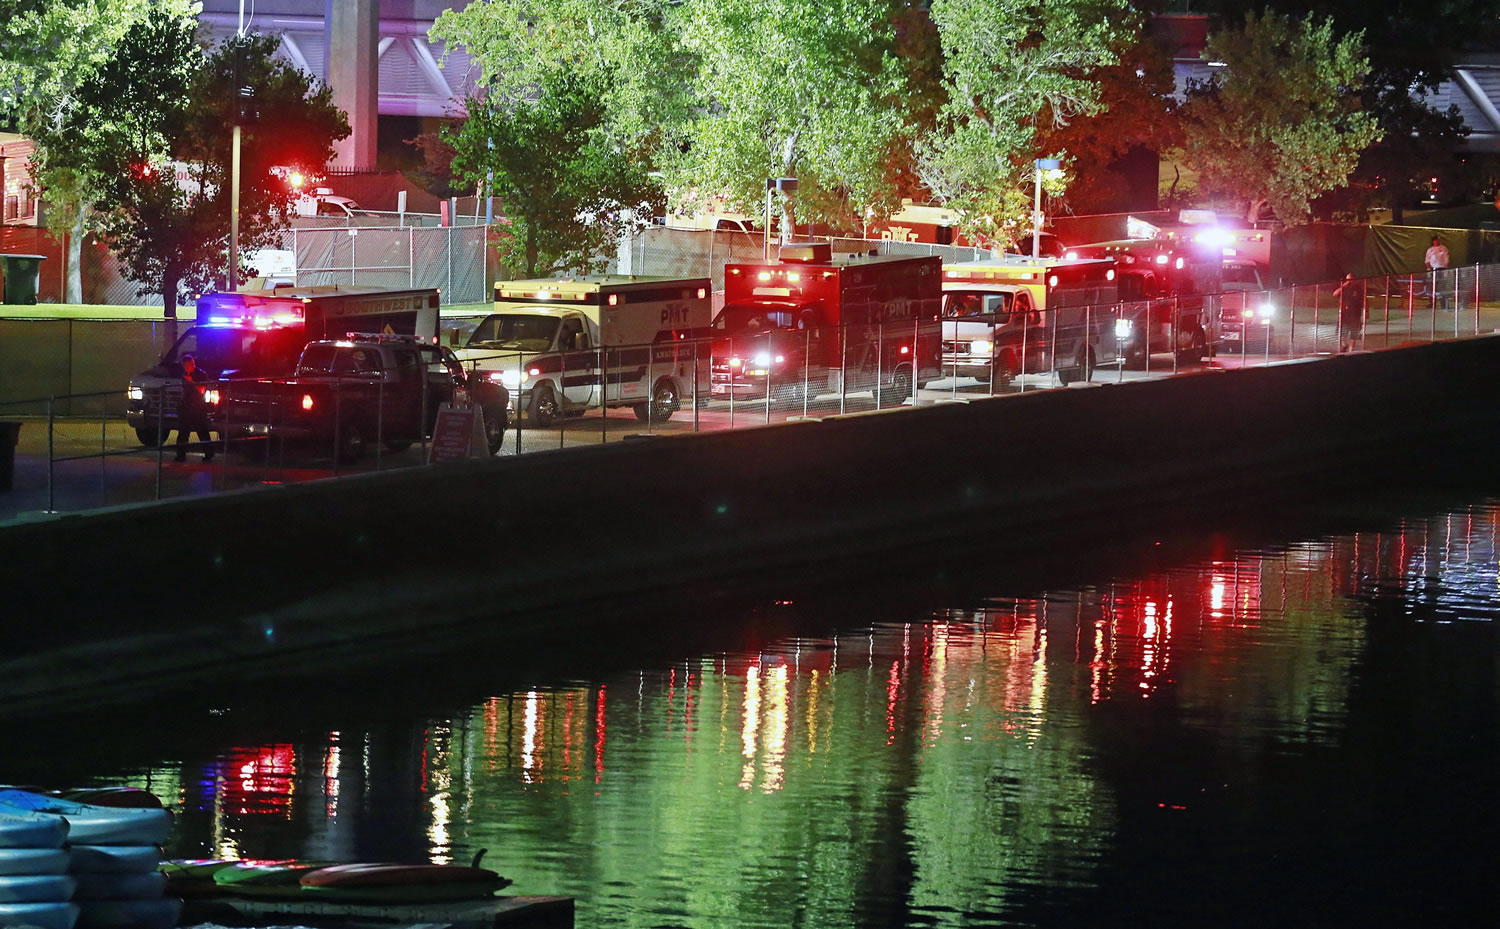 Fire units and ambulances line up to transport injured concertgoers Saturday at Tempe Beach Park in Tempe, Ariz. An Arizona music festival was scheduled to resume Sunday for a Kanye West performance after as many as 12 people were injured when a crowd rushed a stage Saturday night.